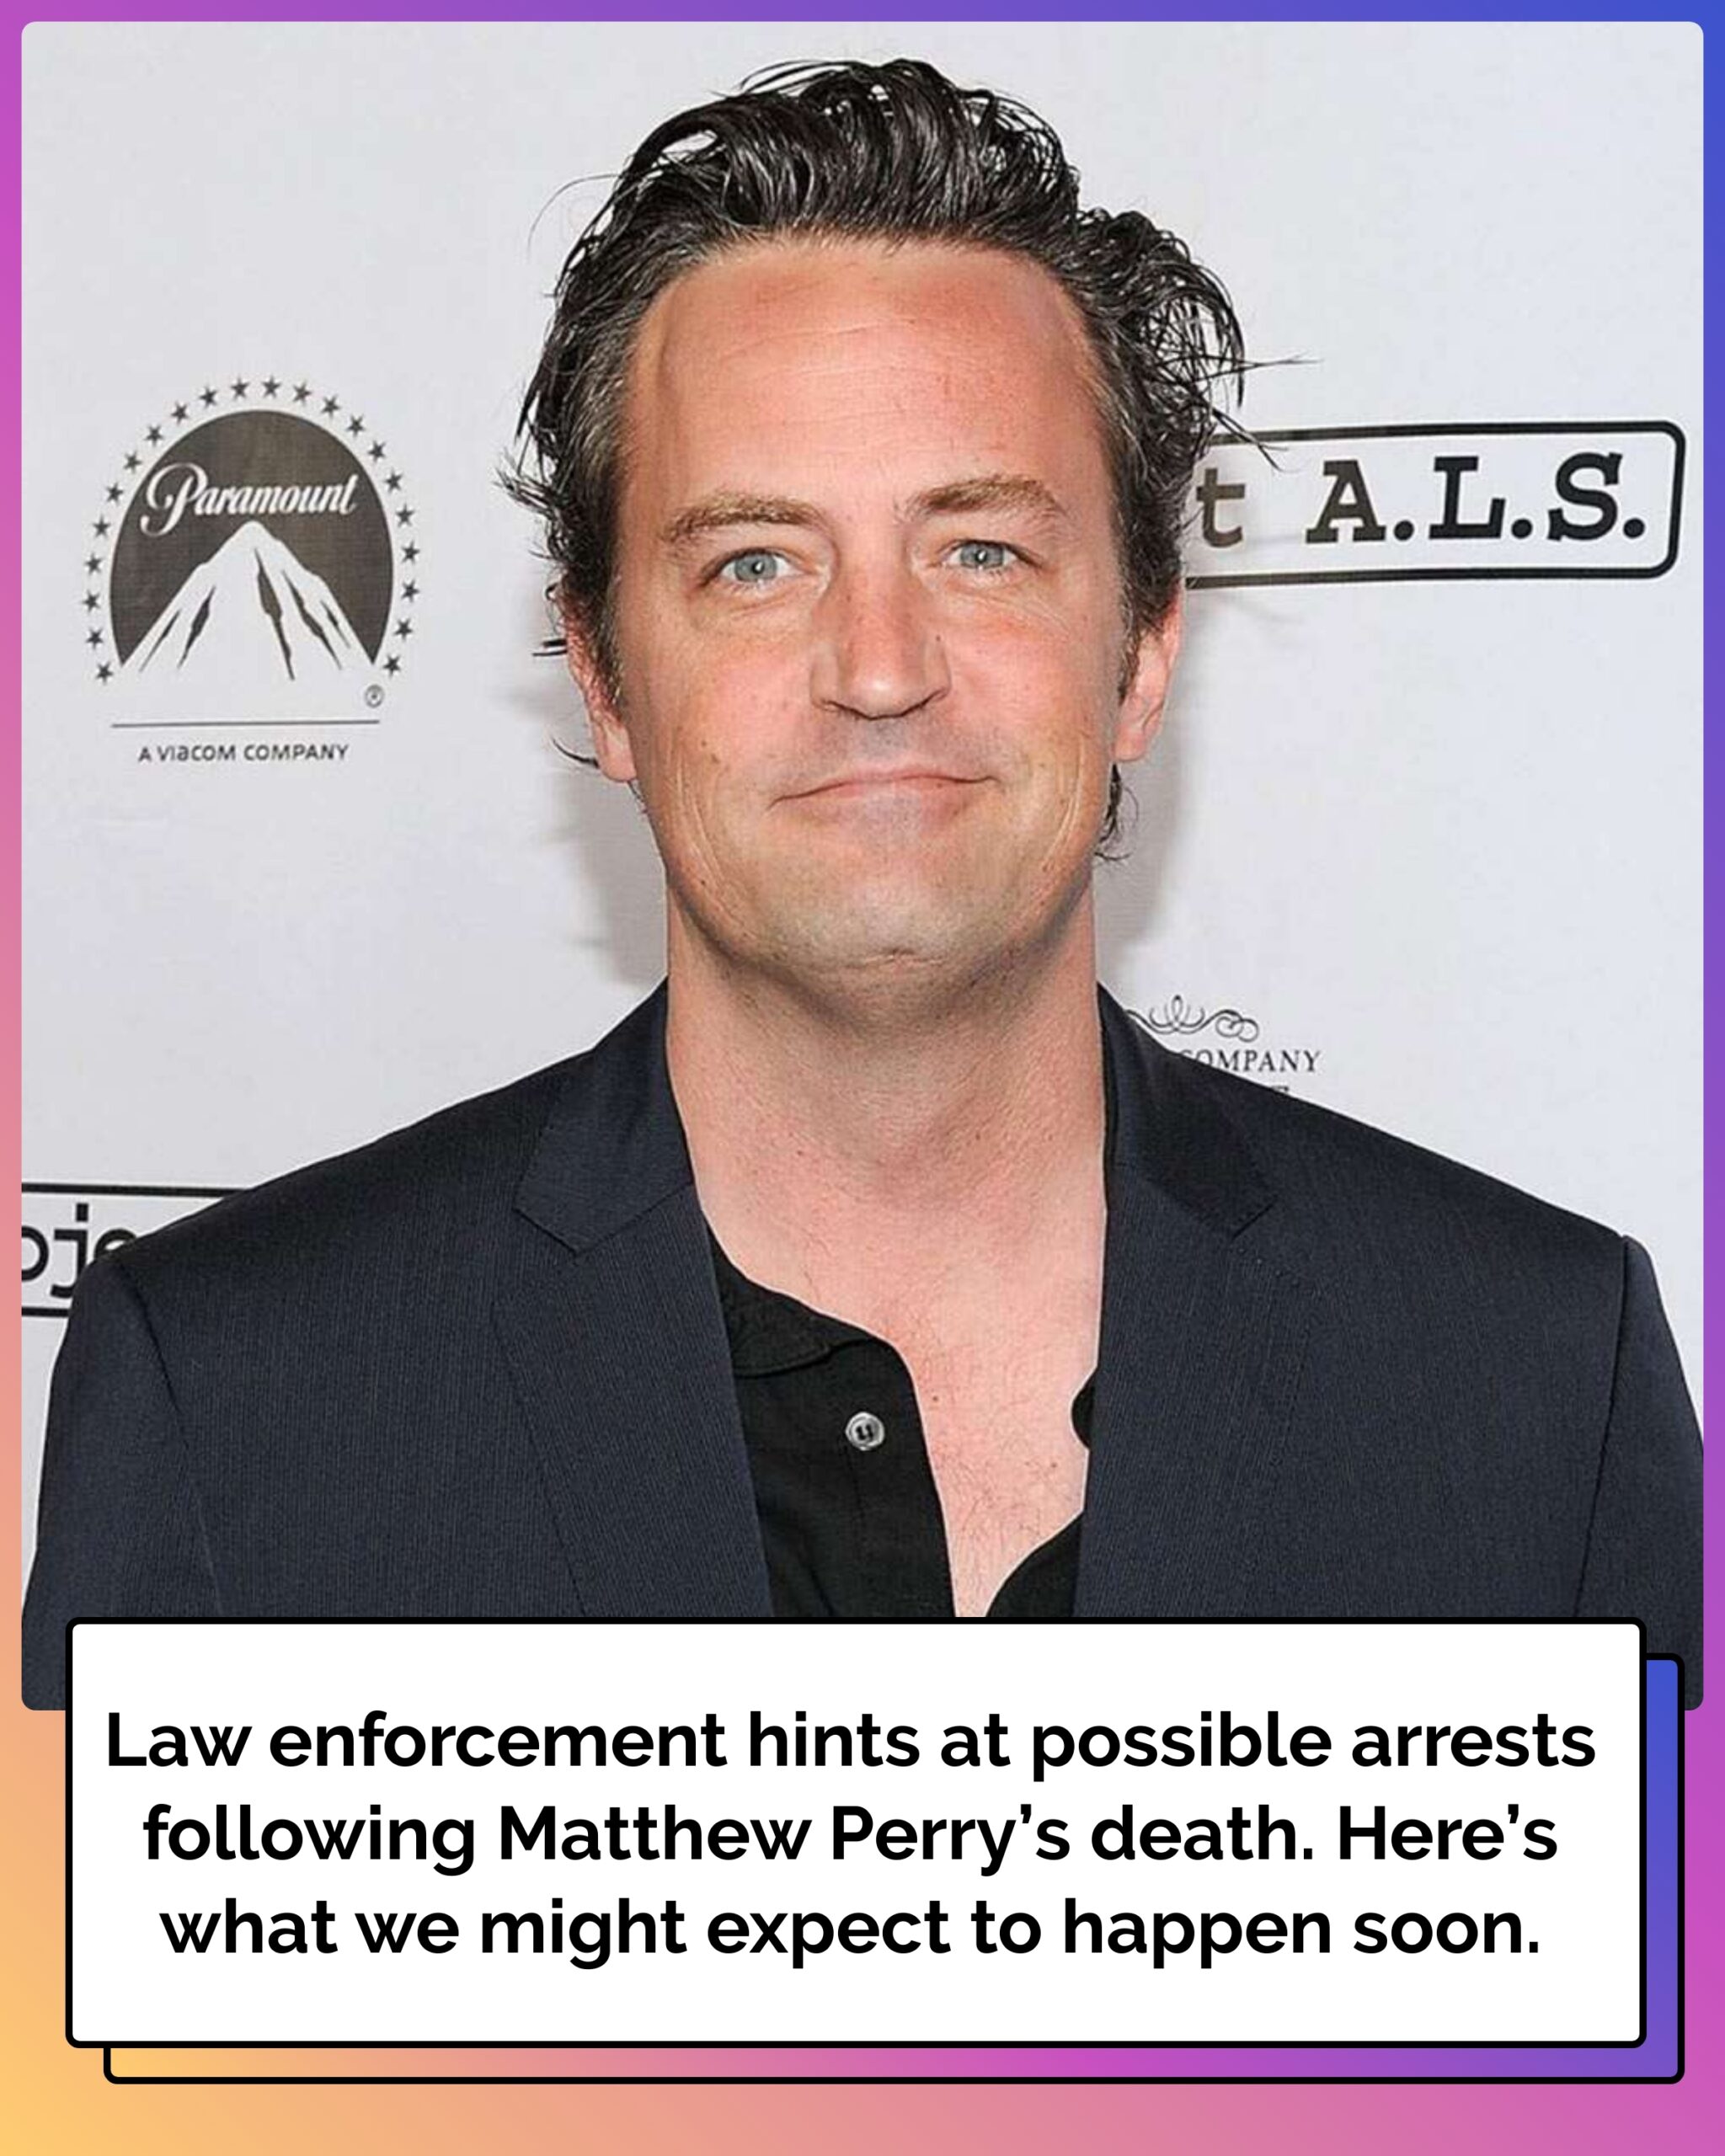 Law Enforcement Source Says Arrests Should Be Made After Matthew Perry’s Death: Here’s What Could Happen Next